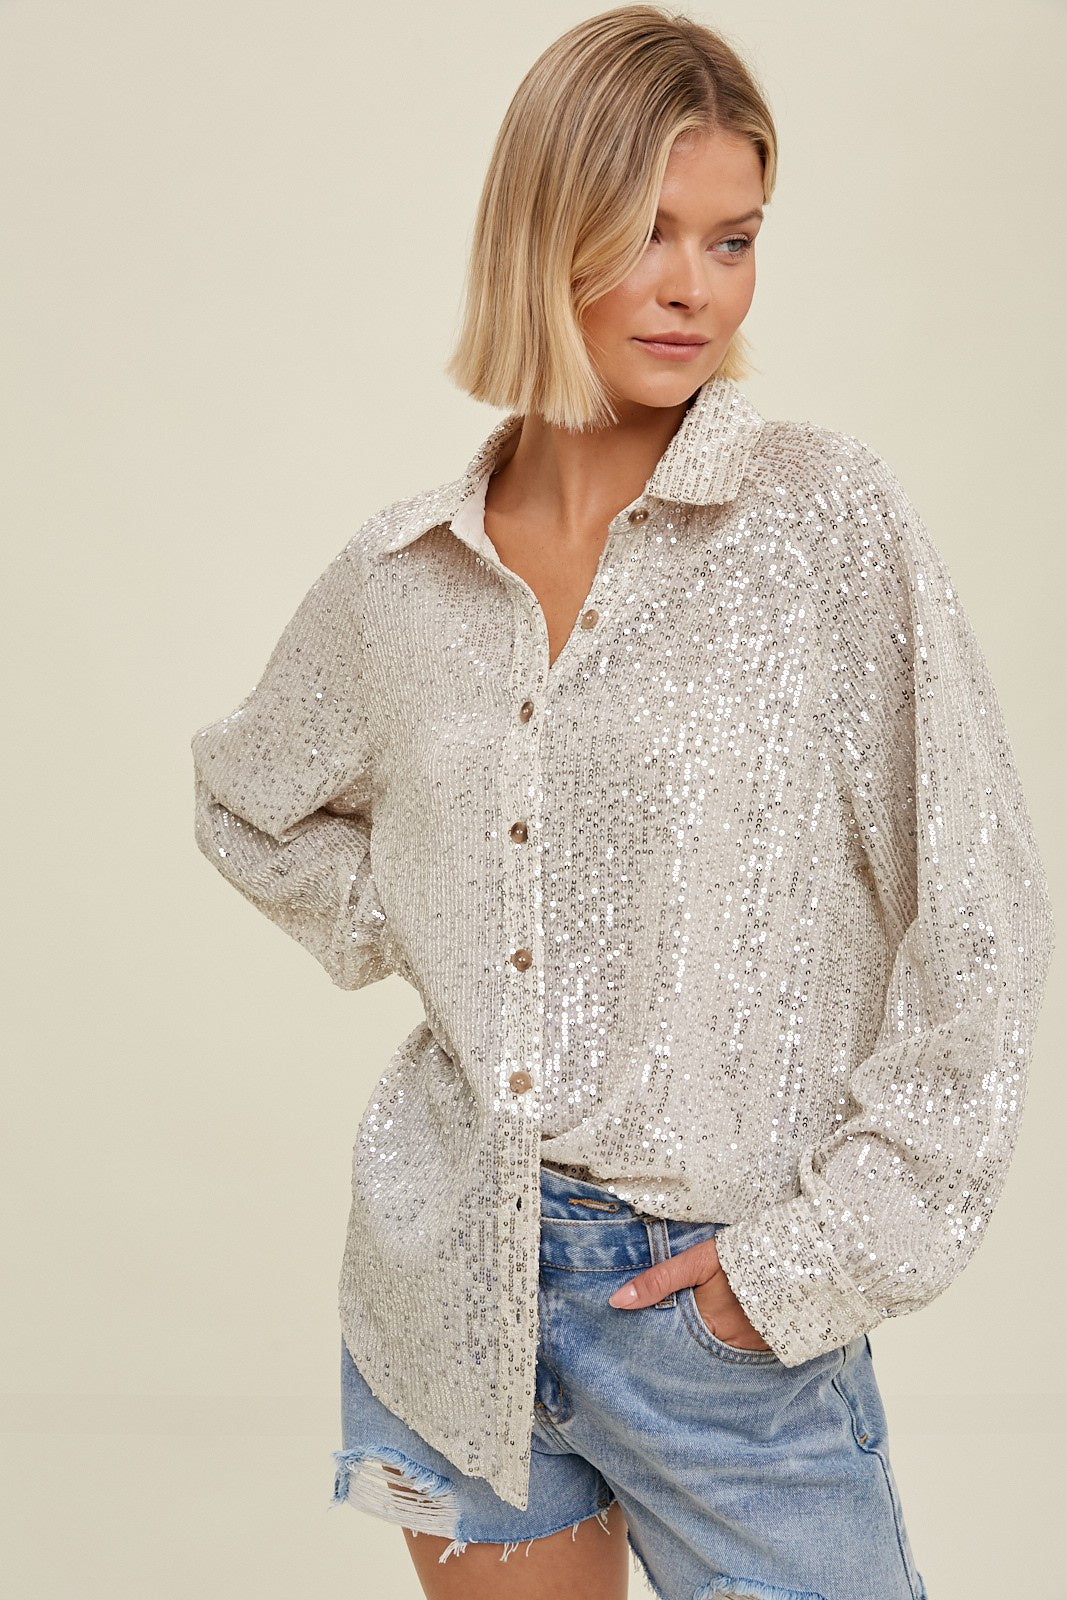 Shine Bright Sequined Button-Up Shirt